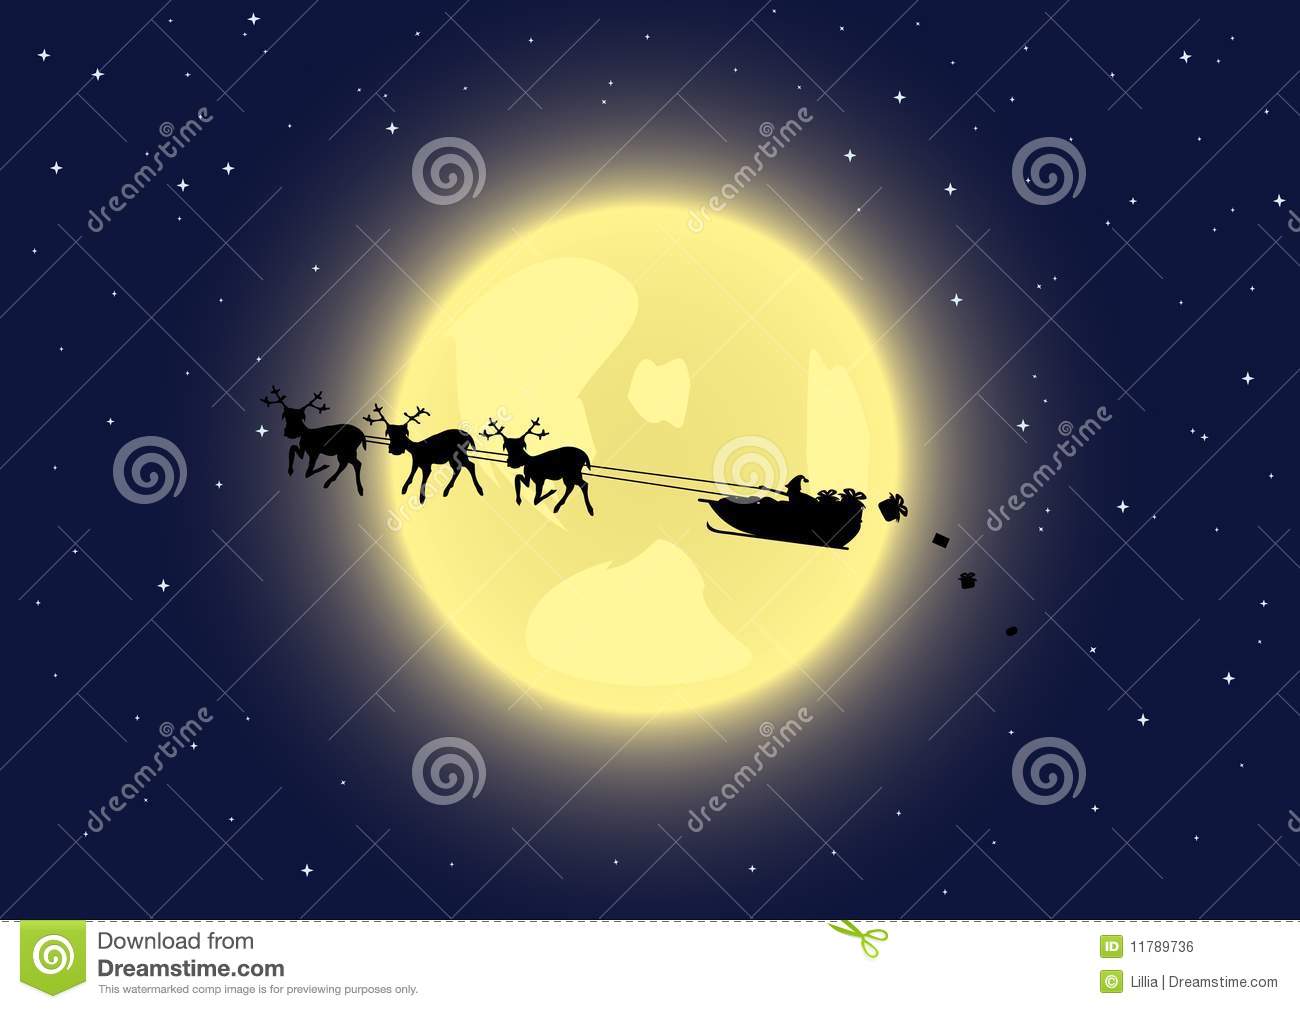 Santa S Sleigh In The Sky Royalty Free Stock Image   Image  11789736